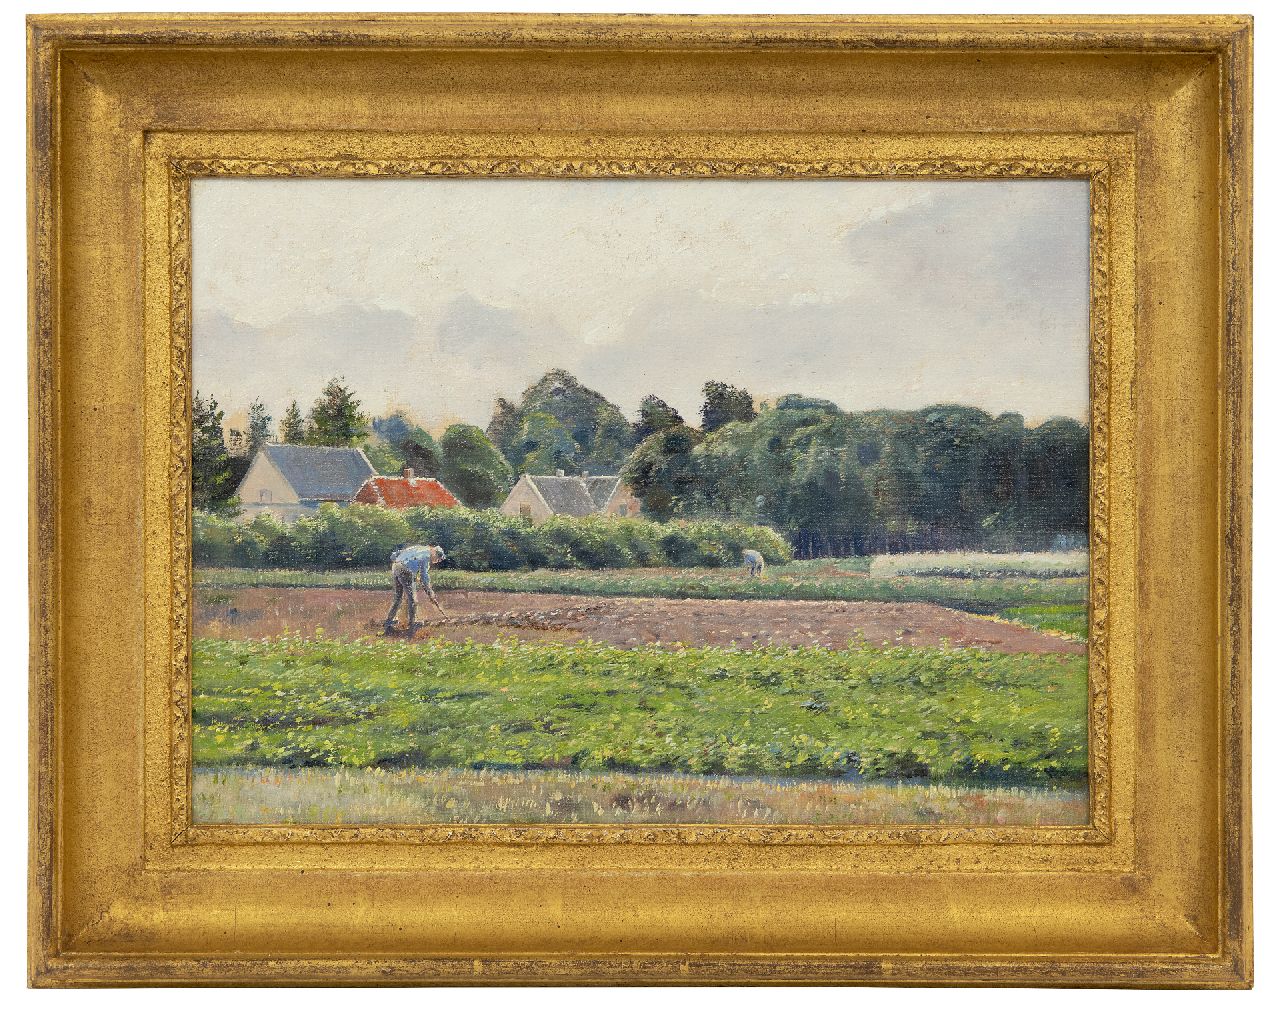 Stricker C.L.  | Charles Ludwig Stricker | Paintings offered for sale | Landscape at Ede, augustus 1918, oil on canvas laid down on board 25.1 x 34.5 cm, ca. august 1918